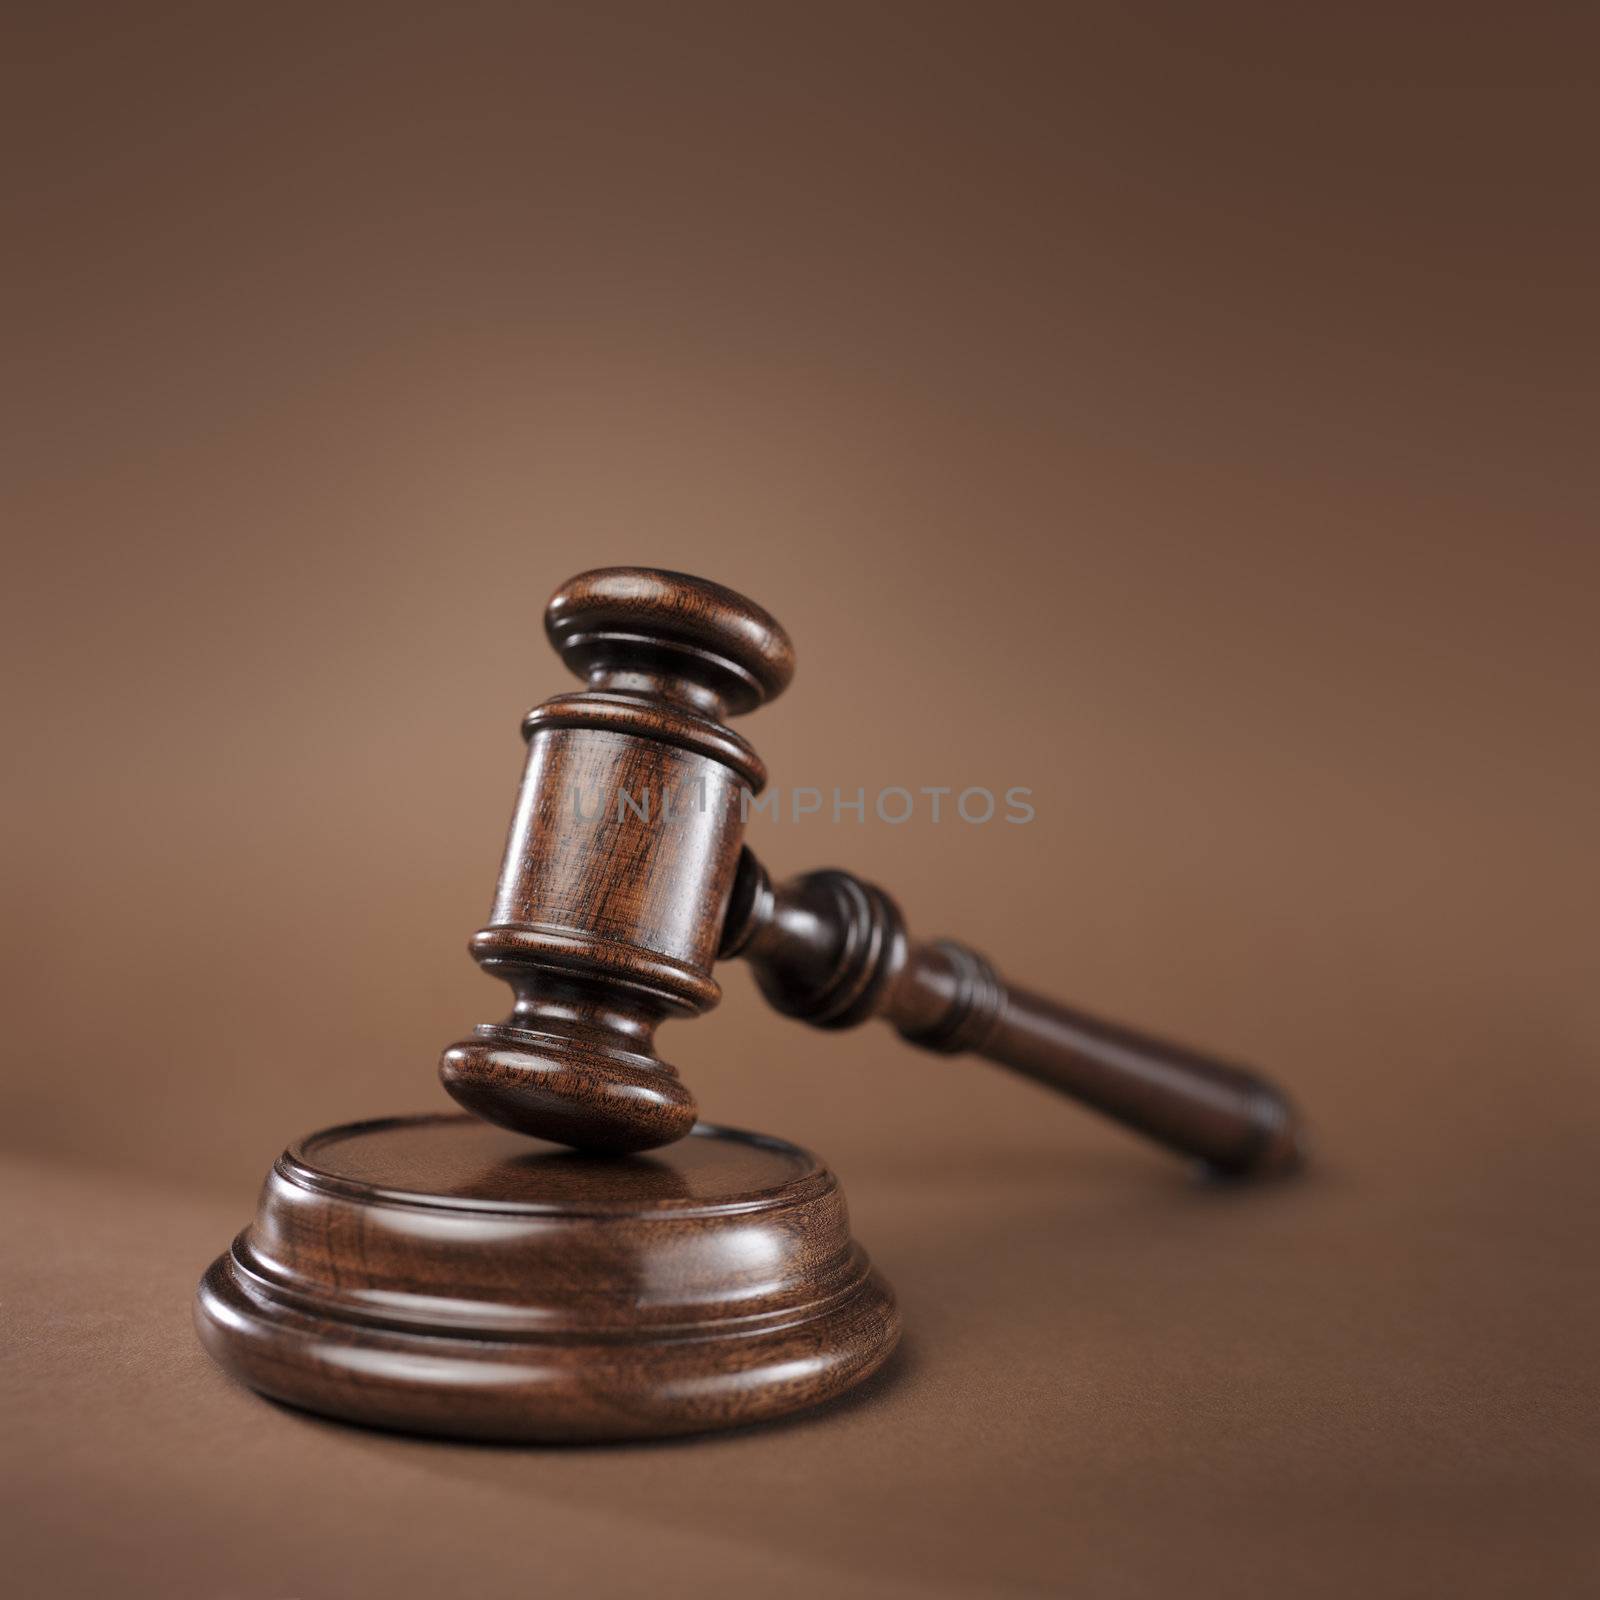 High quality wooden gavel and block on brown background. Short depth-of-field.